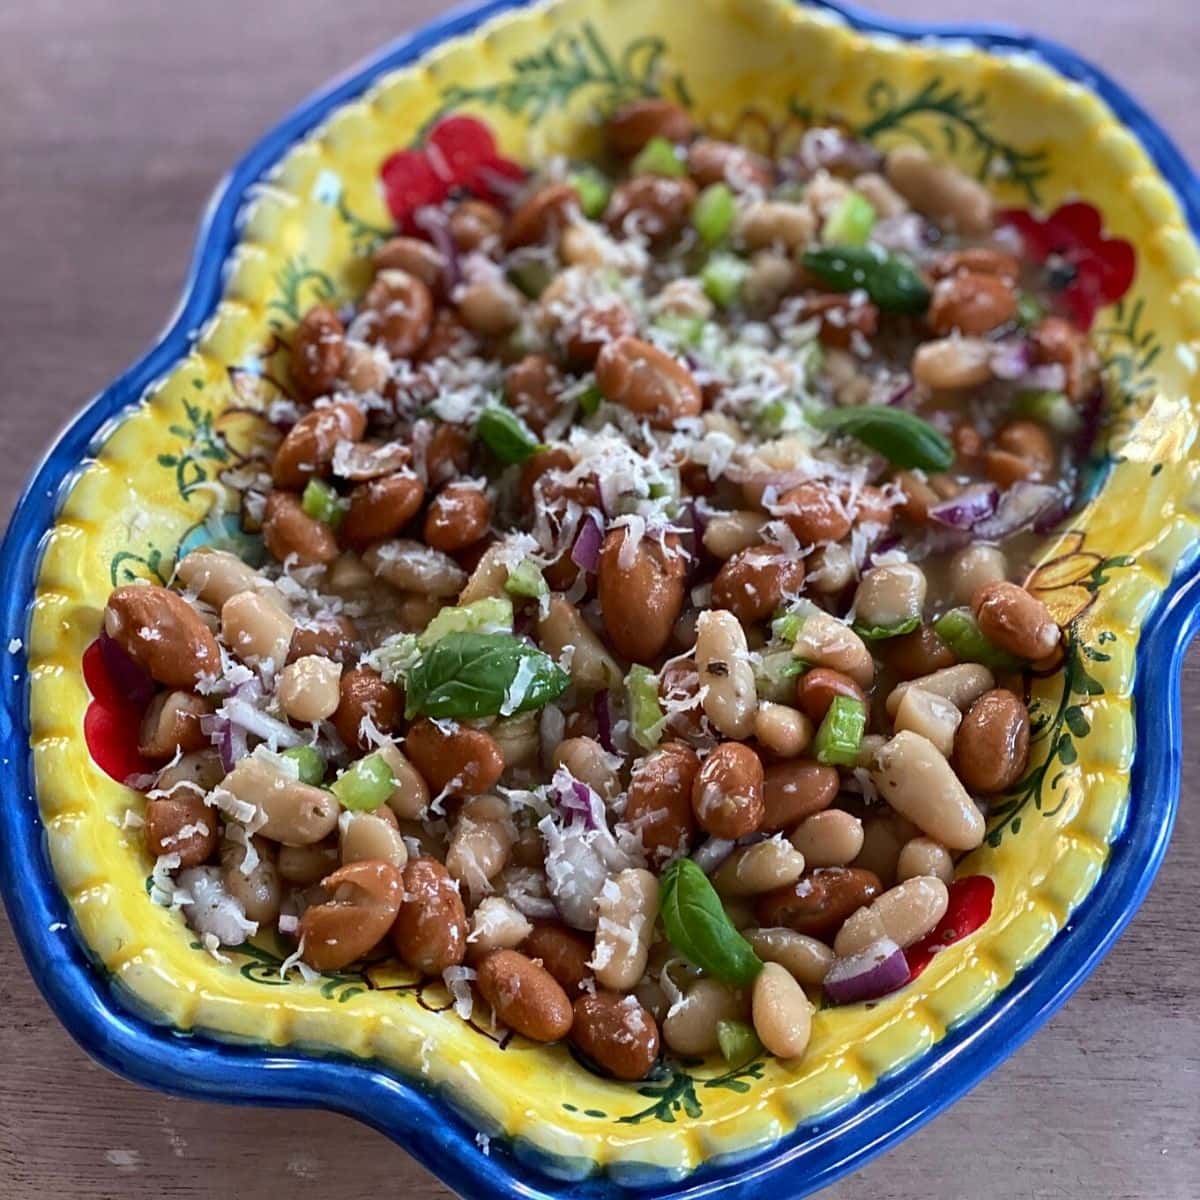 Bean salad on a colorful painted Italian ceramic plate.